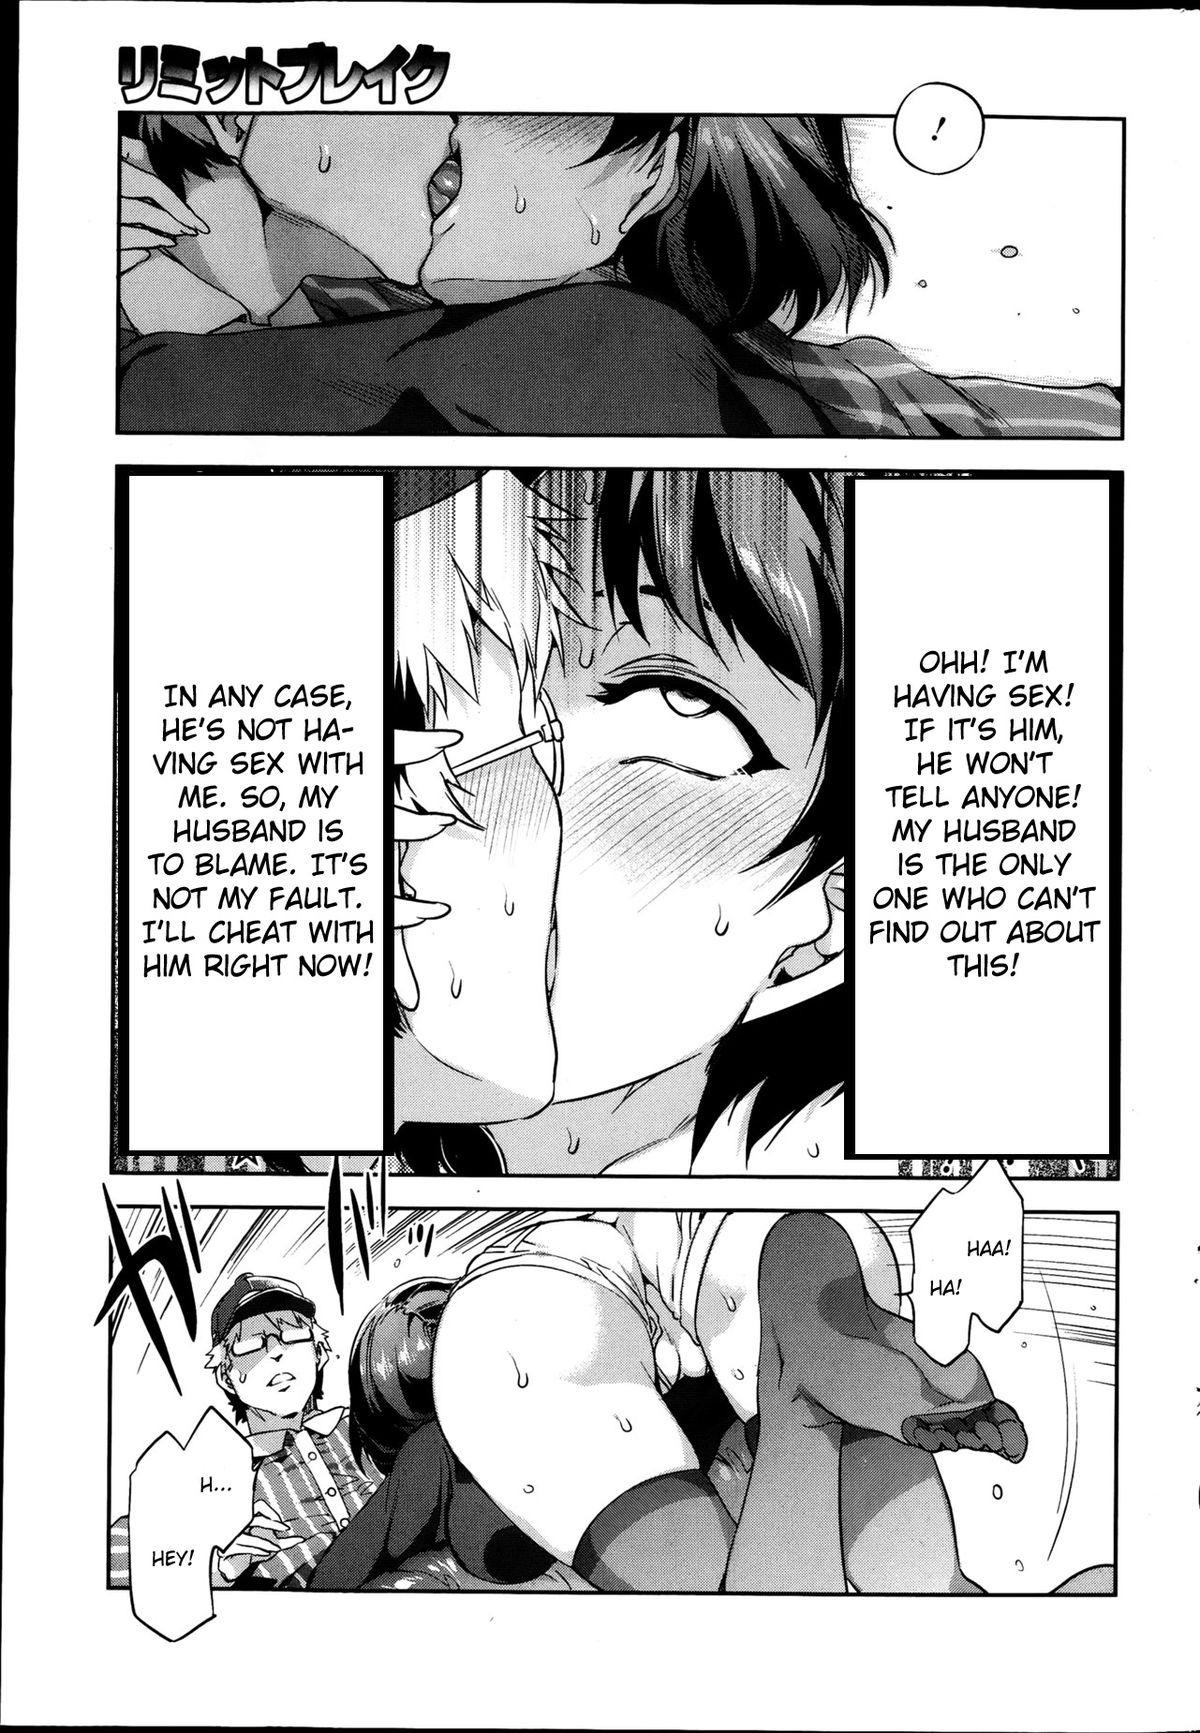 Limit Break Page 9 Of 18 hentai haven, Limit Break Page 9 Of 18 uncensored ...